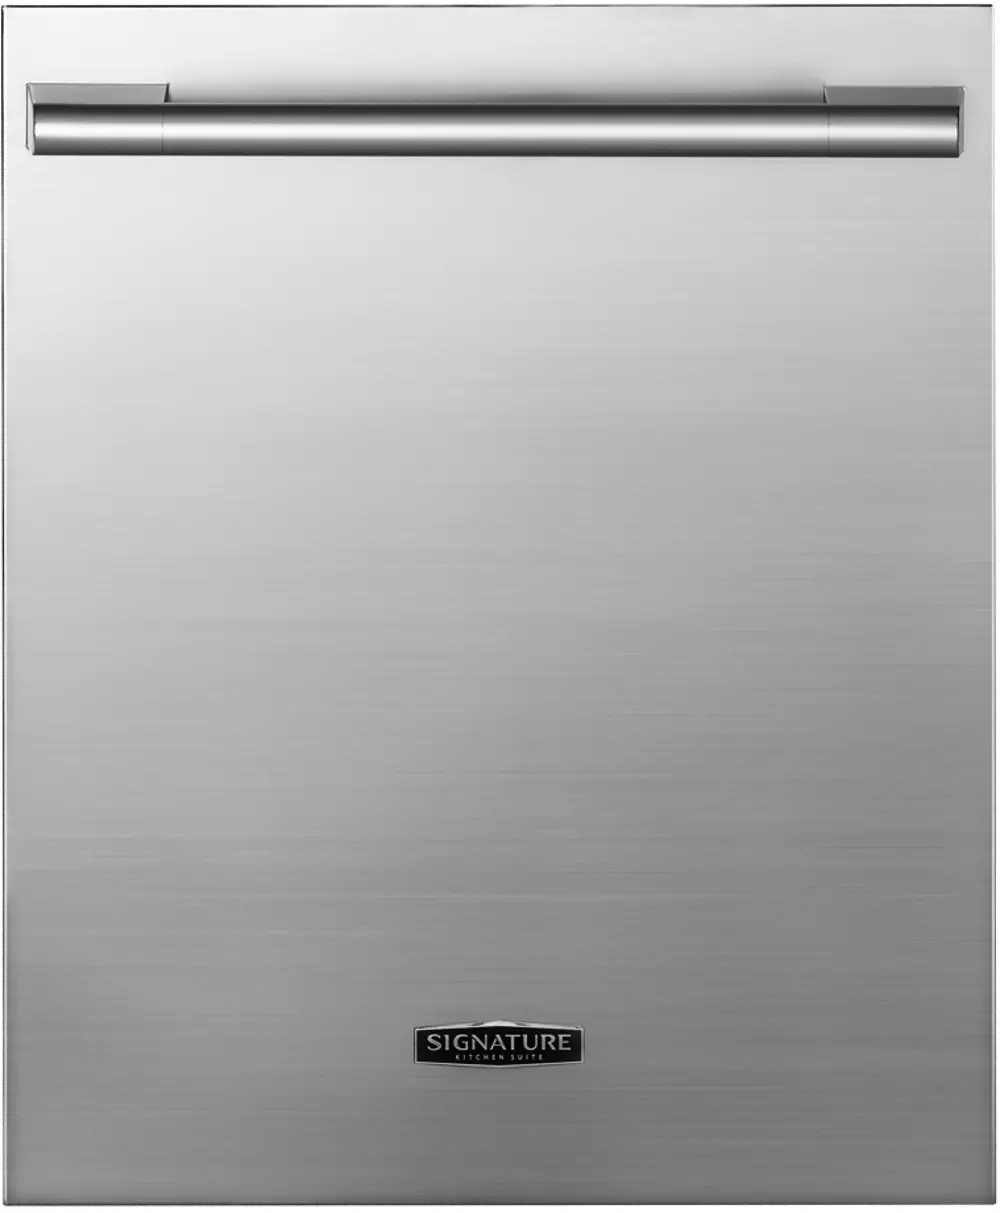 SKSDW2401S Signature Kitchen Suites Top Control Dishwasher - Stainless Steel-1